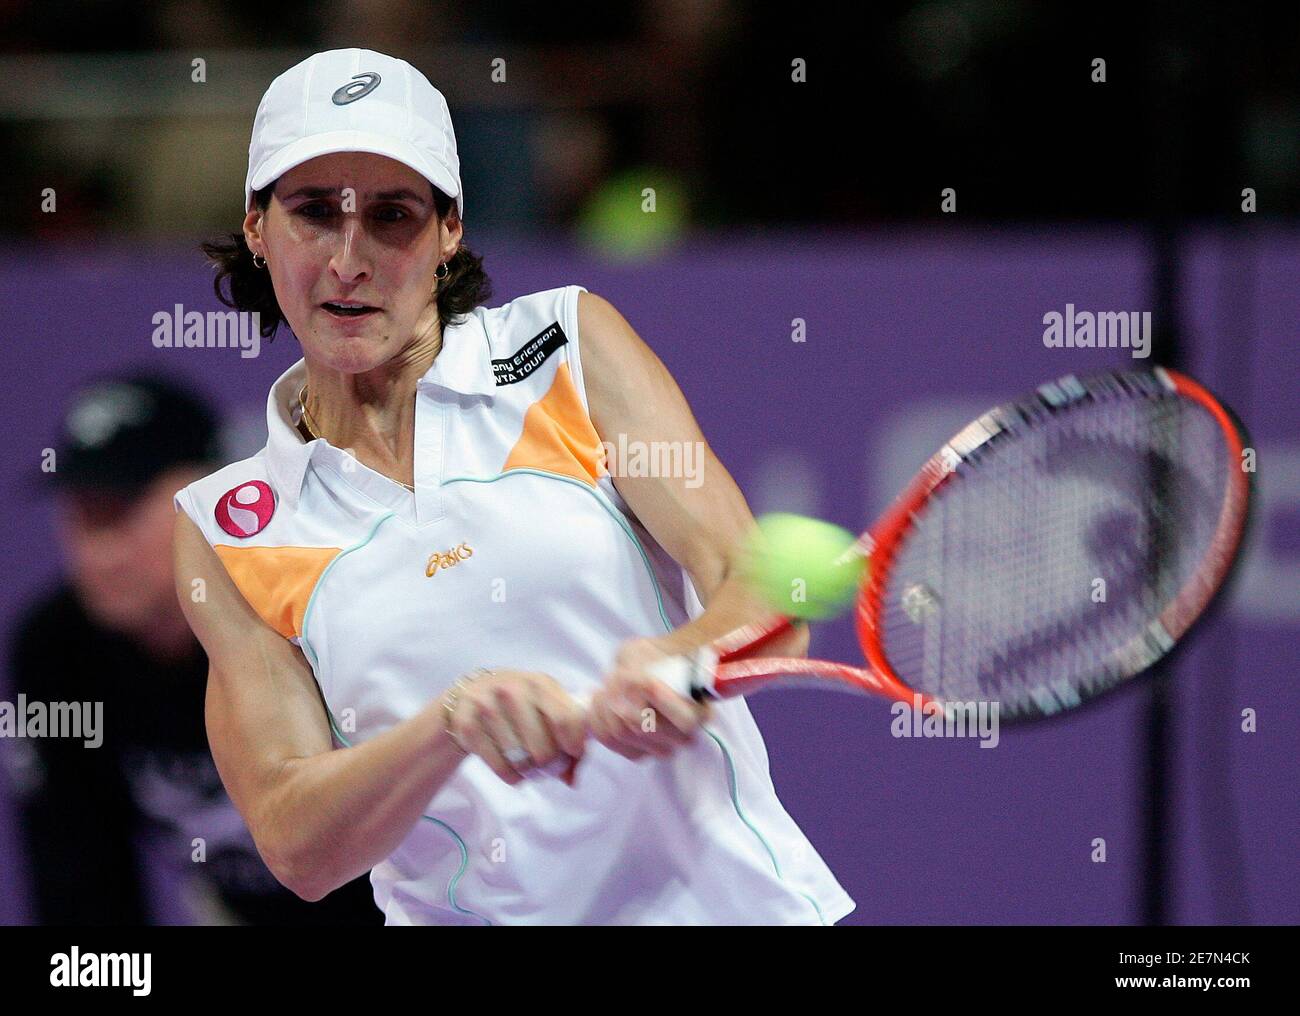 France's Virginie Razzano returns the ball to compatriot Amelie Mauresmo  during the second round of the Proximus Diamond Games tennis tournament in  Antwerp February 15, 2007. REUTERS/Yves Herman (BELGIUM Stock Photo - Alamy